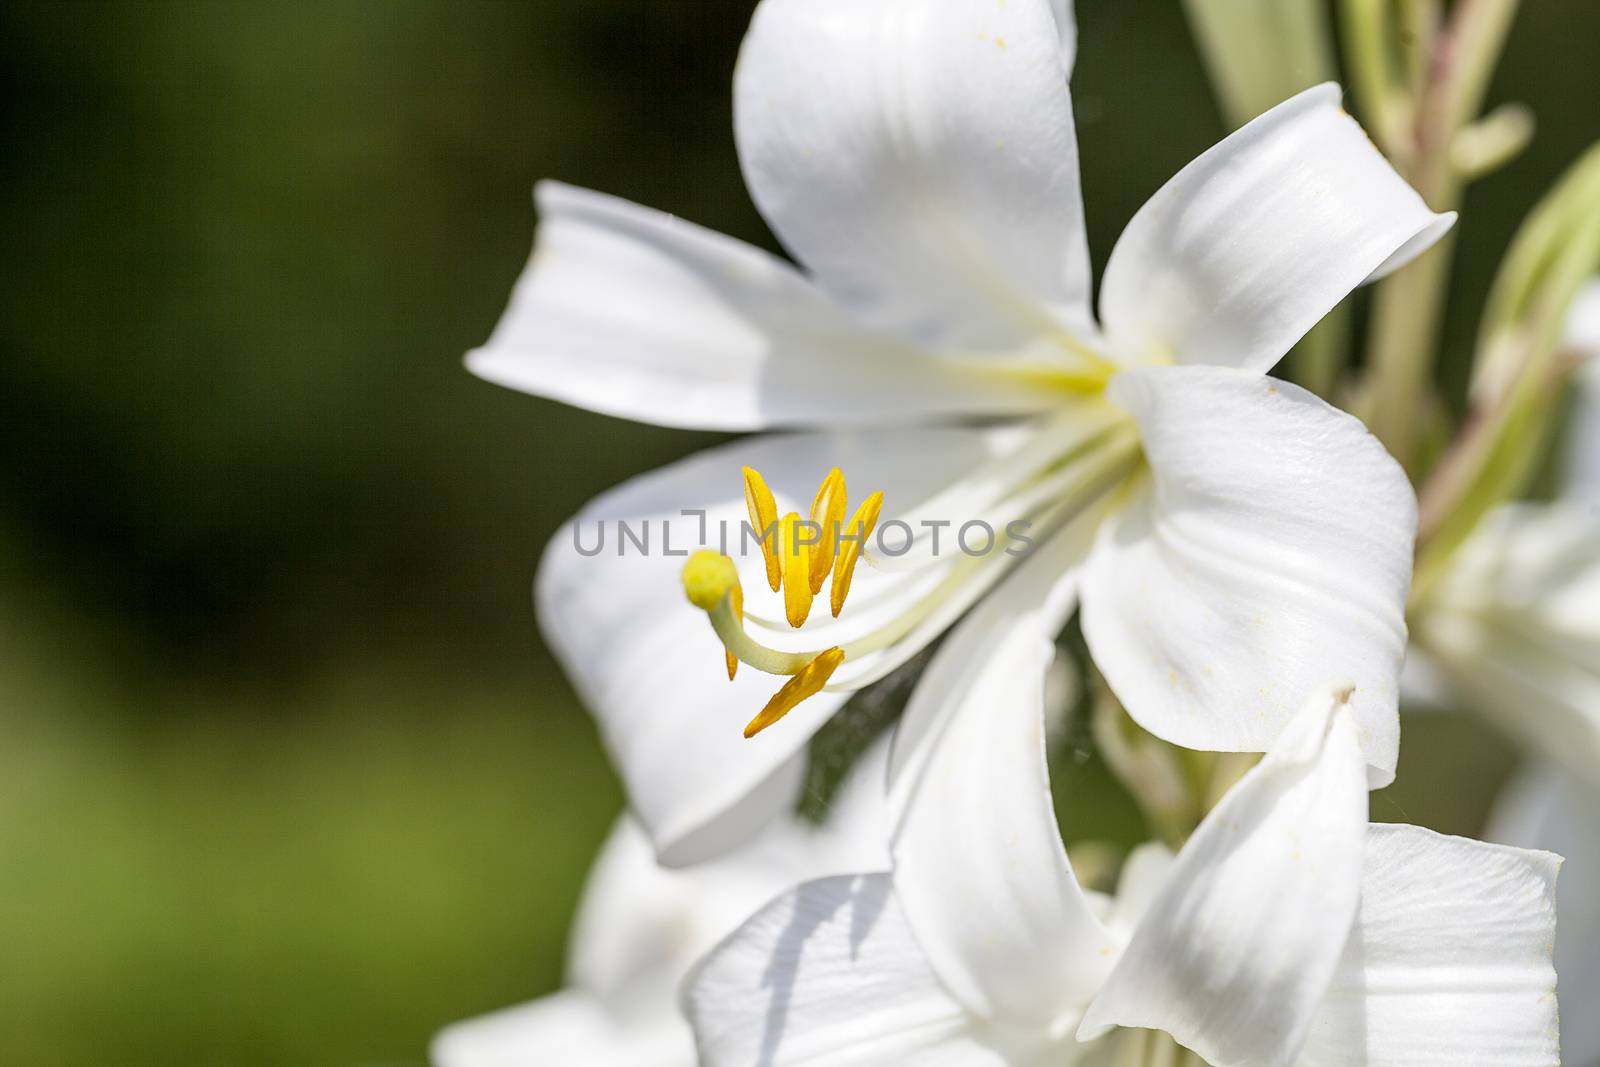 Flowers of white Lilium candidum blooming in the garden by mychadre77